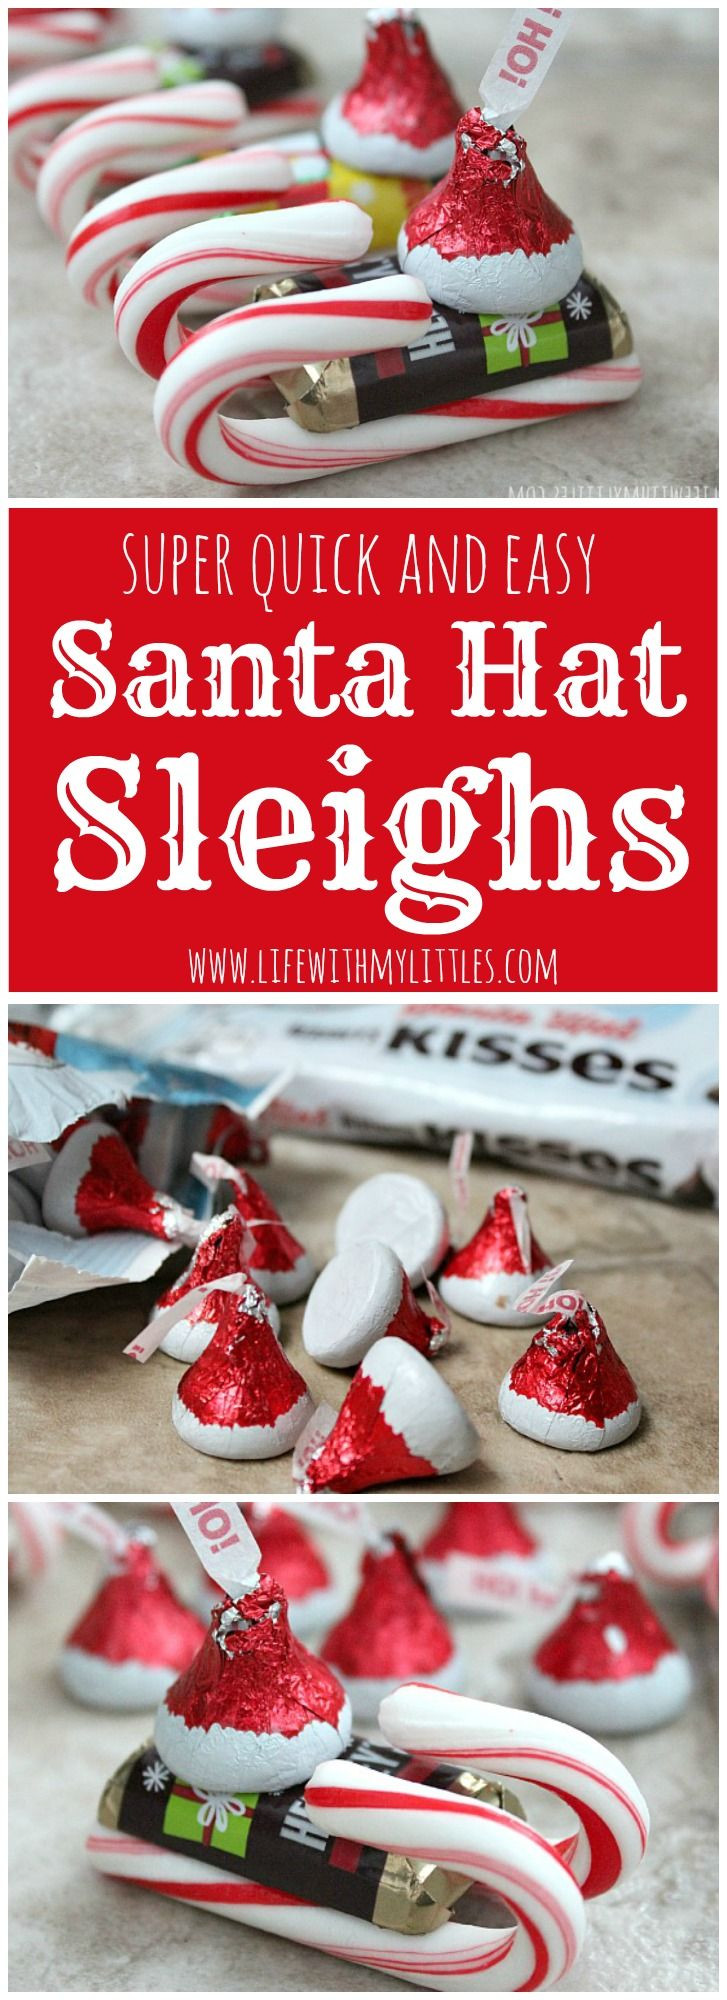 Candy Christmas Gifts
 Best 25 Candy crafts ideas on Pinterest